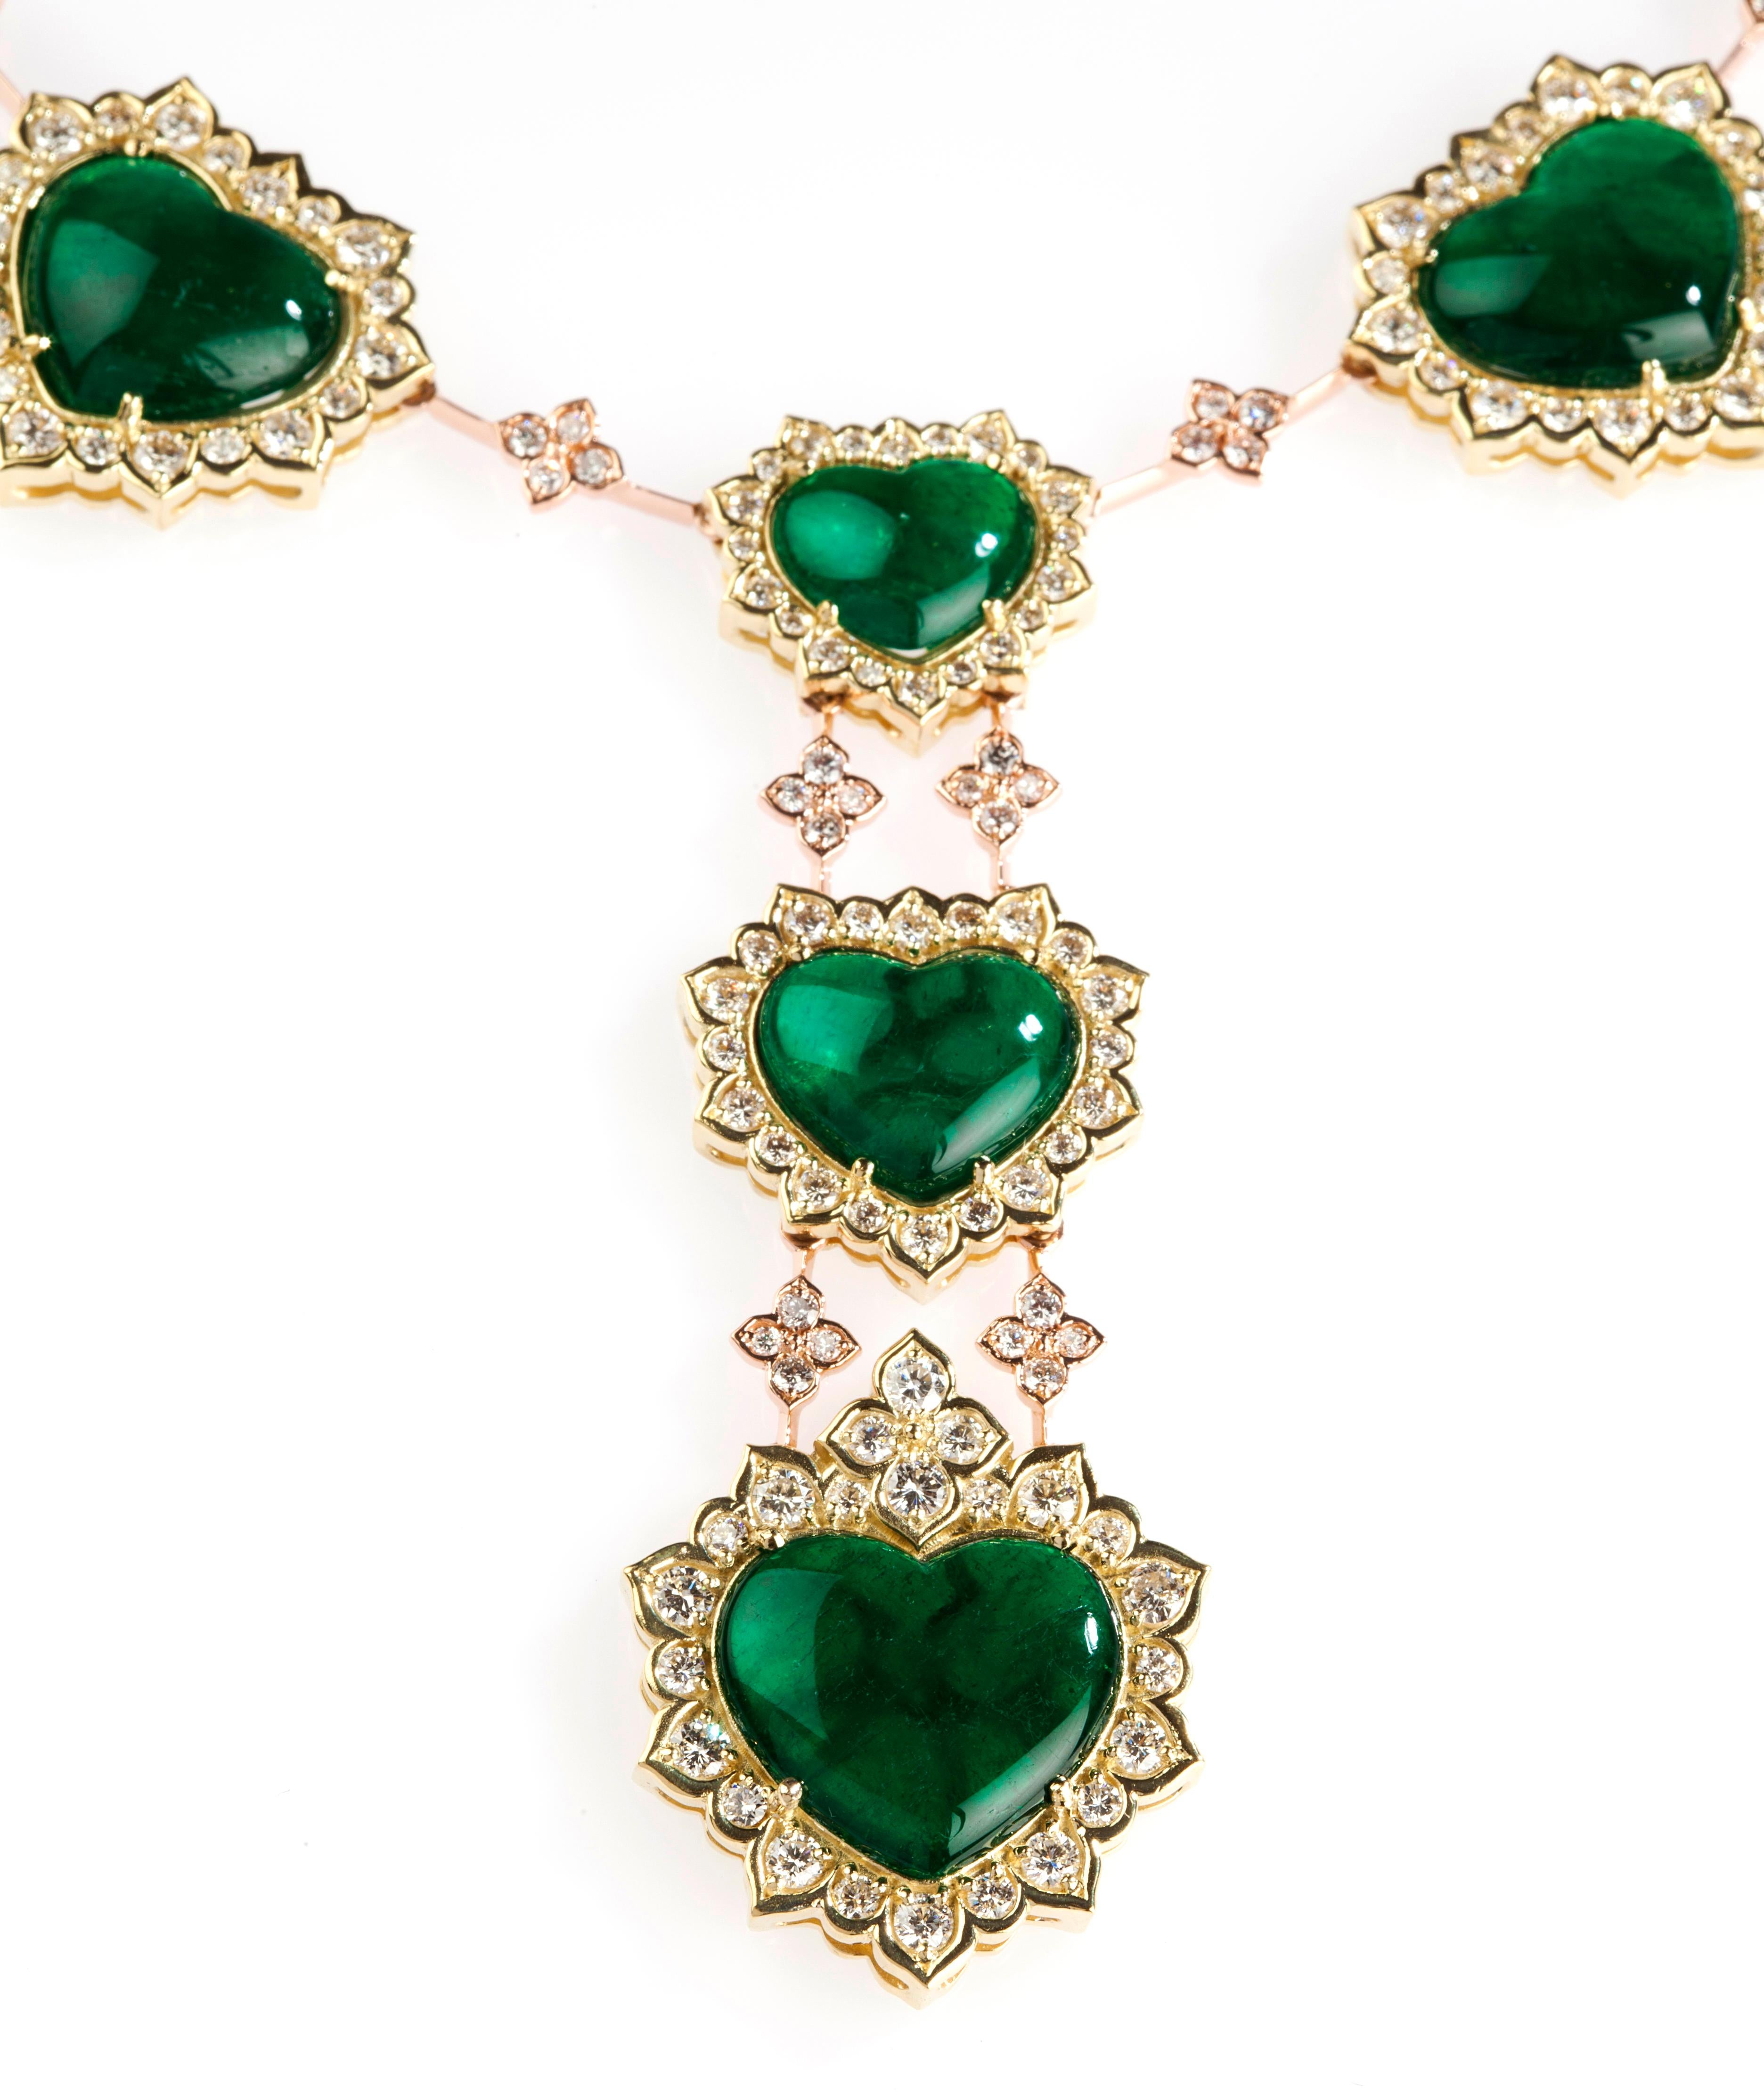 18K Gold and Diamond Necklace with Heart shape C. Dunaigre Swiss Lab Certified Colombian Emeralds by Stambolian

This state-of-the-art necklace by American designer, Stambolian is a one-of-a-kind with unique and incredible design

Nine total